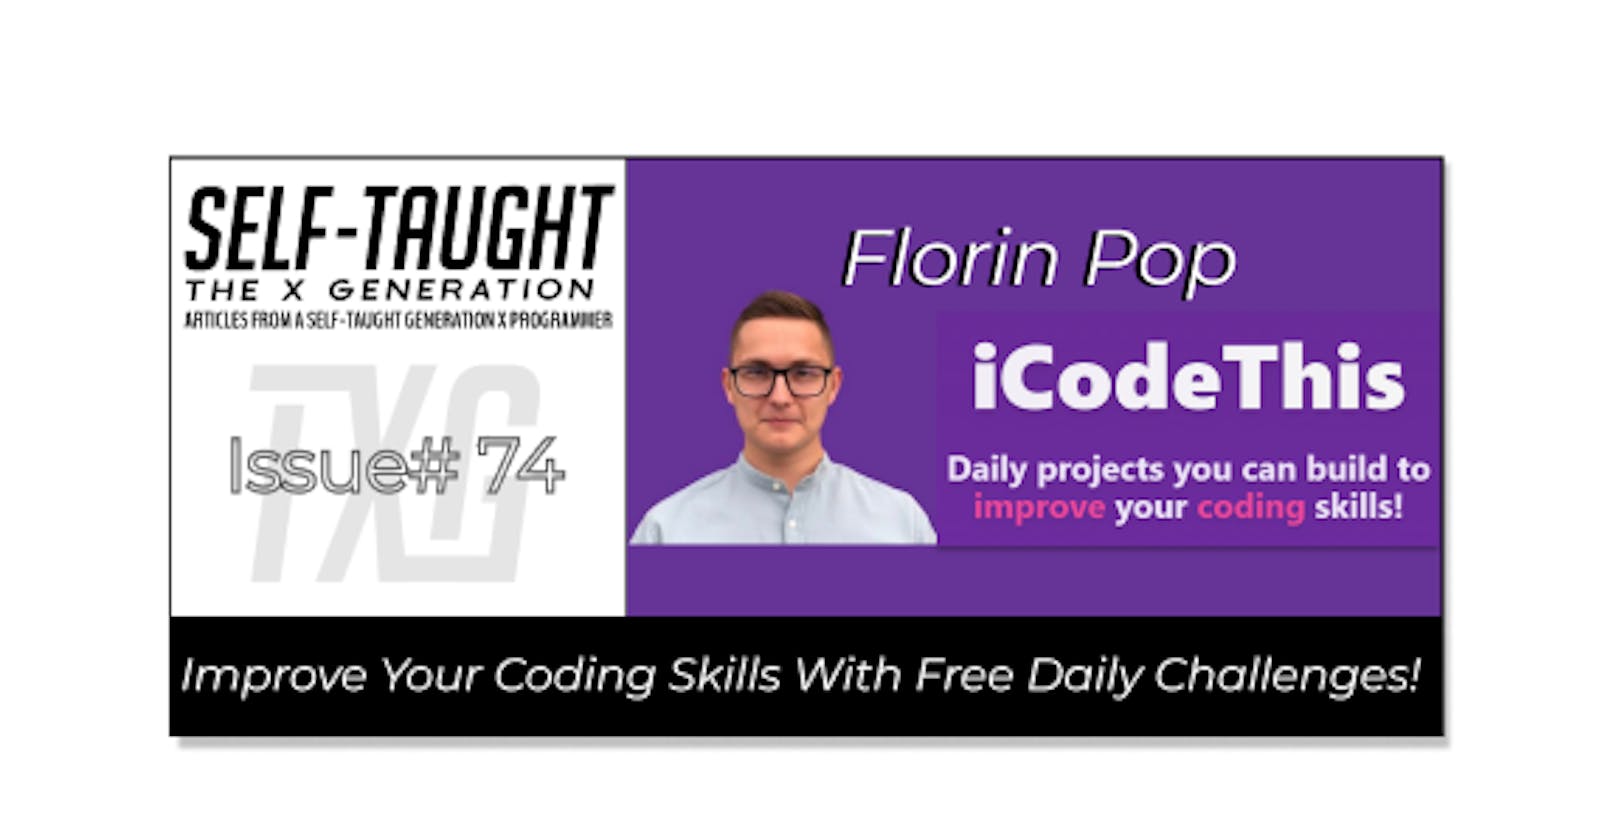 iCodeThis: Improve Your Coding Skills With Free Daily Challenges